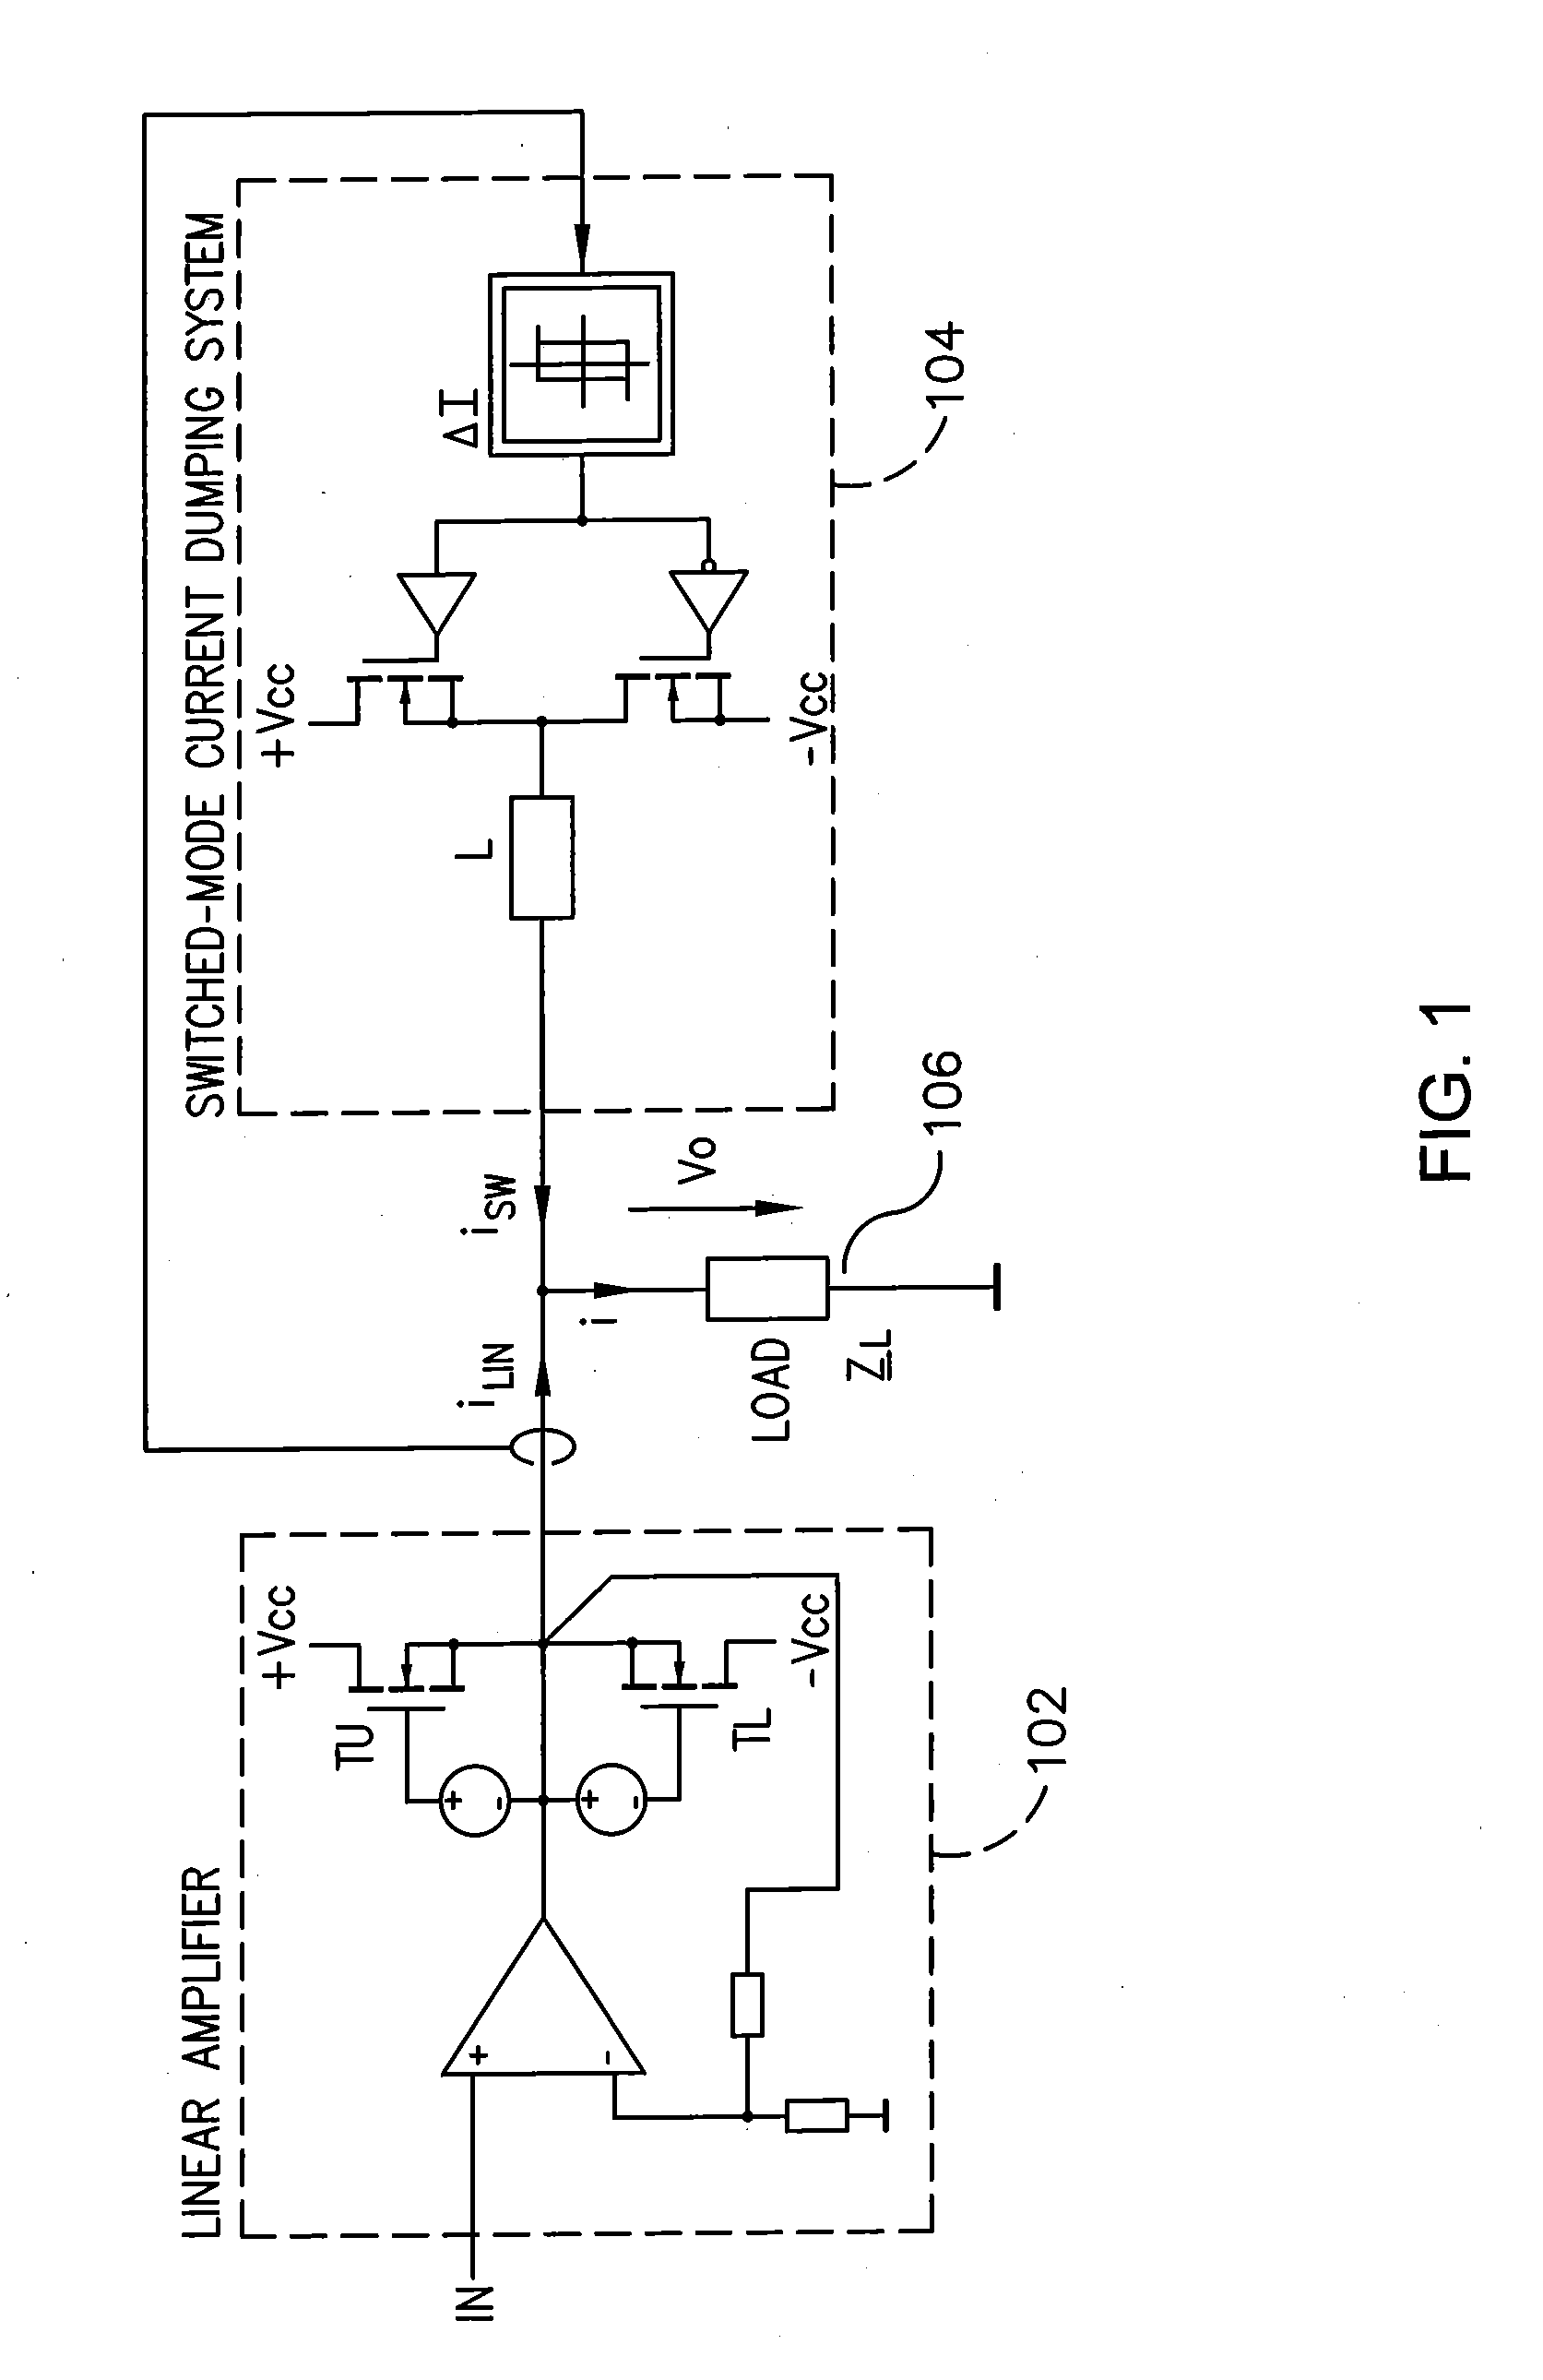 High efficiency balanced output amplifier system